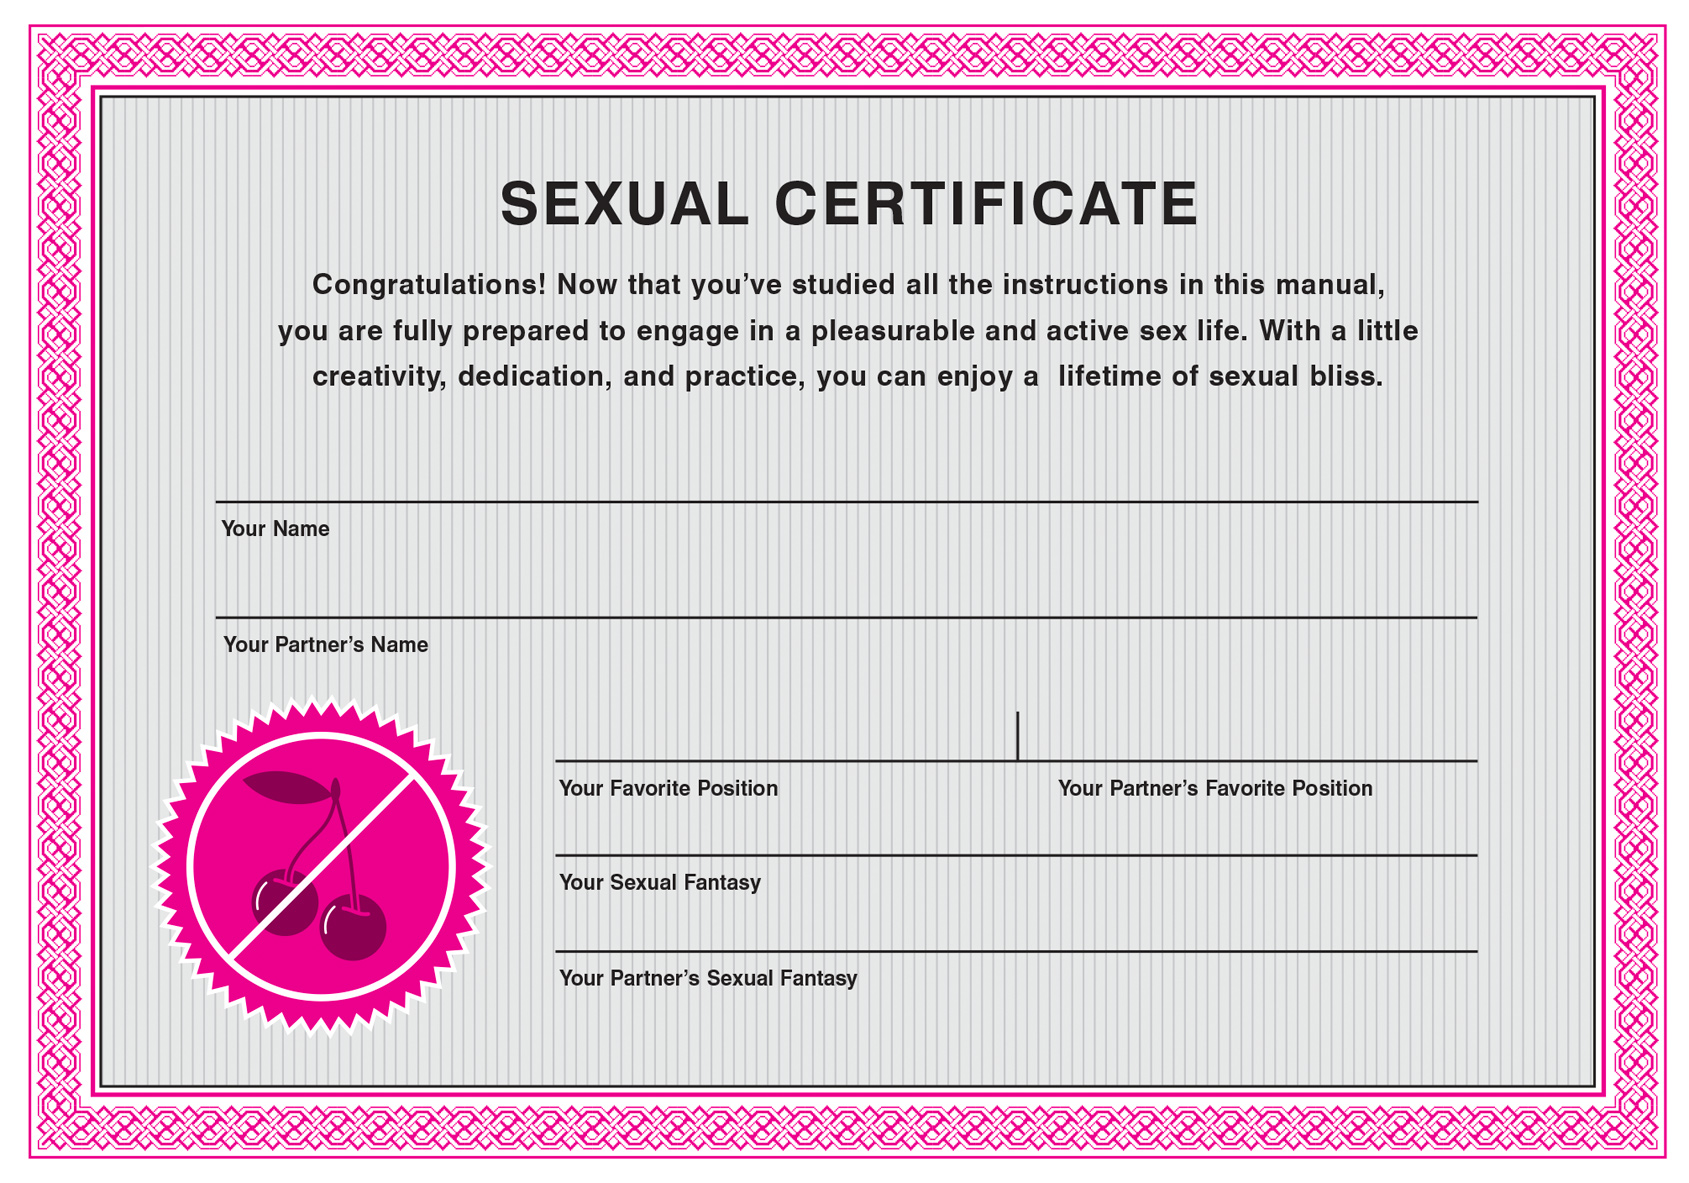 Extended Ebook Content For The Sex Instruction Manual Sexual Certificate 3110